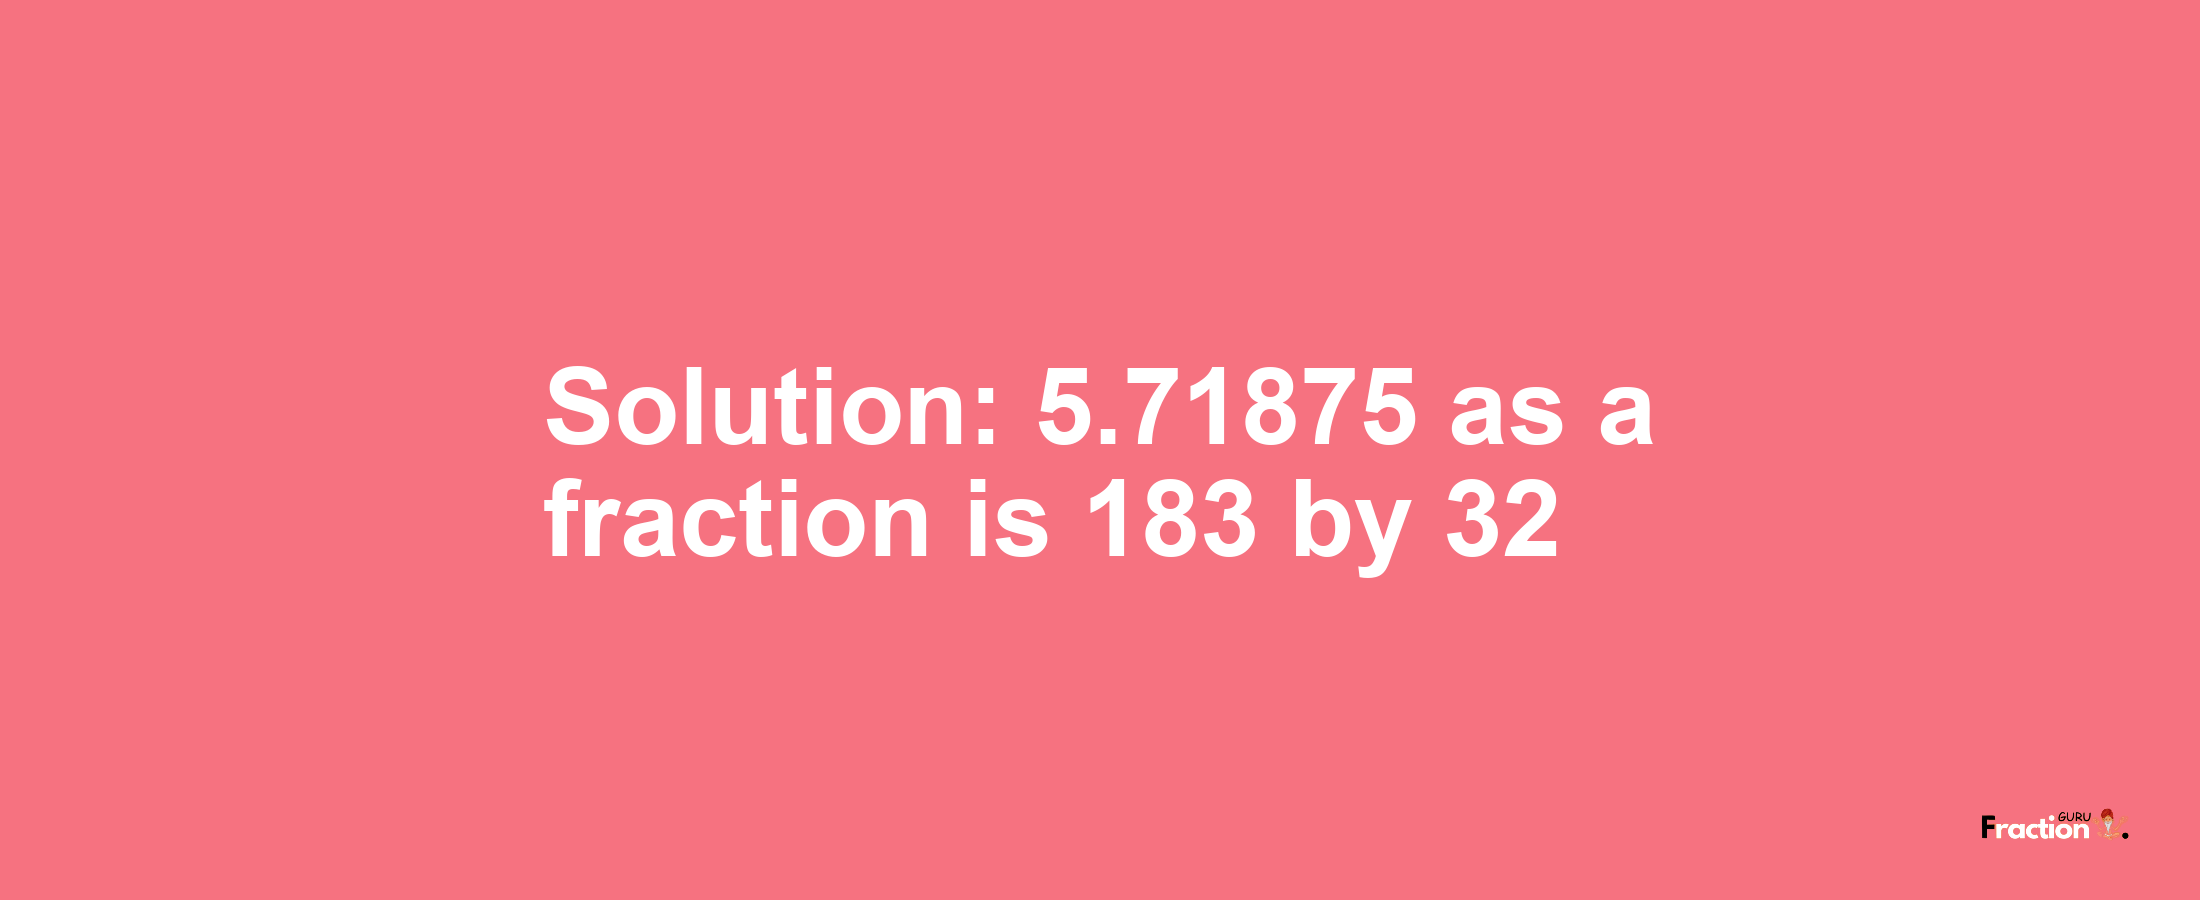 Solution:5.71875 as a fraction is 183/32